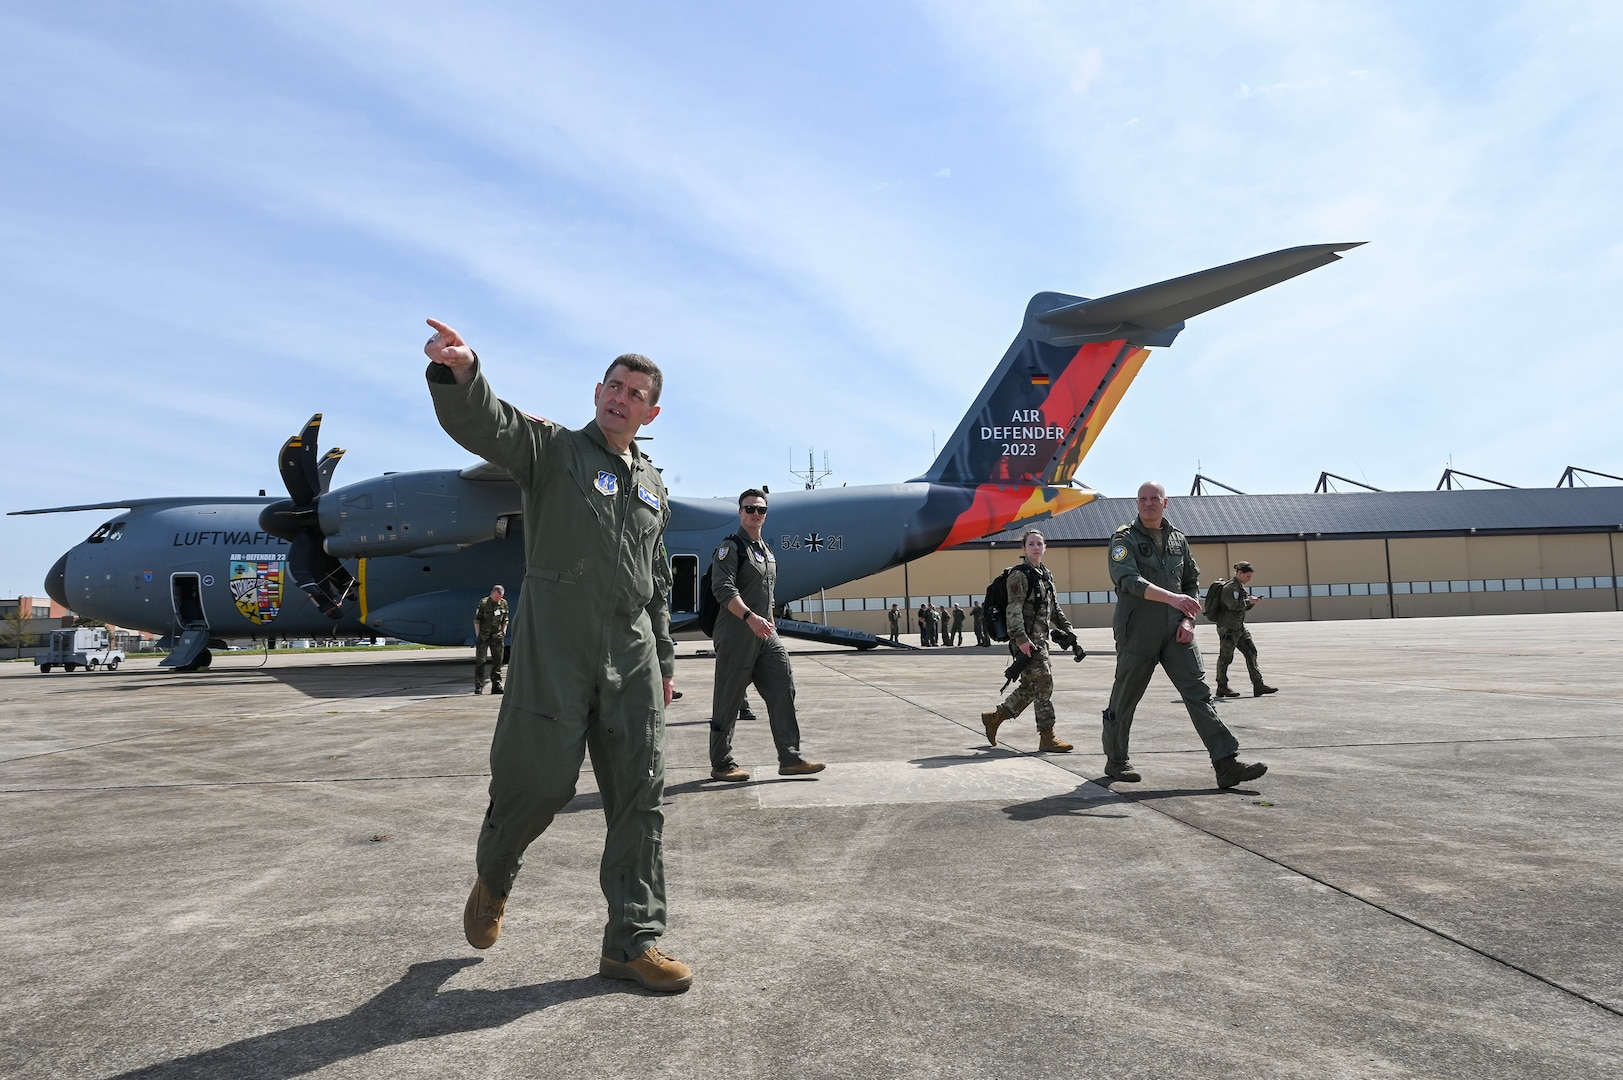 U.S. Air Force Lt. Gen. Michael Loh, front center, director, Air National Guard, tours the flightline during Air Defender 2023 Media Day, Joint Base Andrews, Maryland, April 4, 2023. Members of the German air force and media visited in preparation for Air Defender 2023 in June.